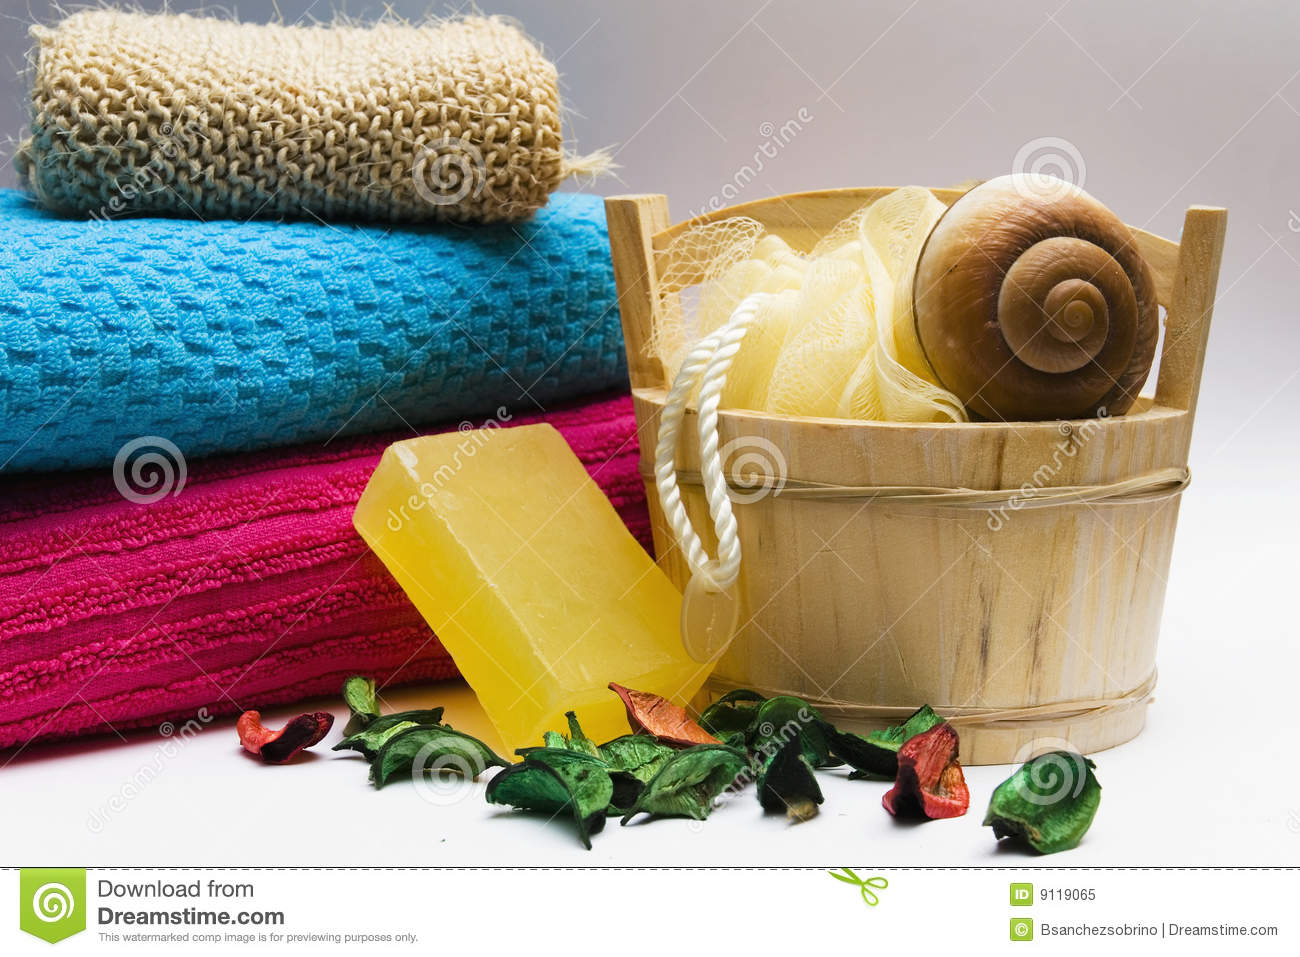 Hygiene Items Such As Towels A Bar Of Soap And A Basket Including A    